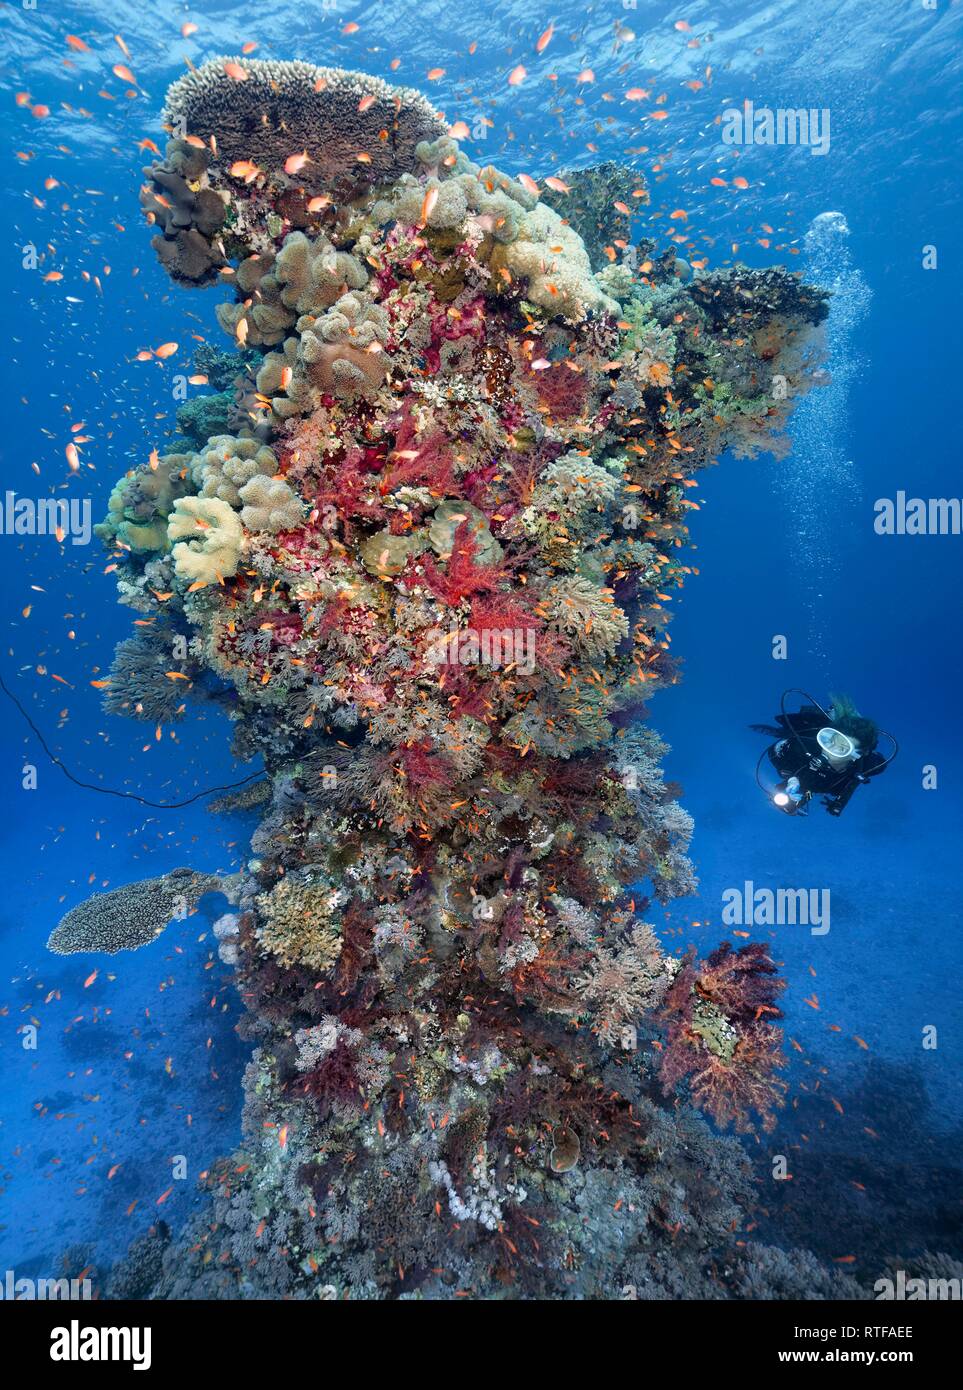 Diver with lamp looking at coral reef, coral tower, densely overgrown with various Soft corals (Alcyonacea), stone corals Stock Photo